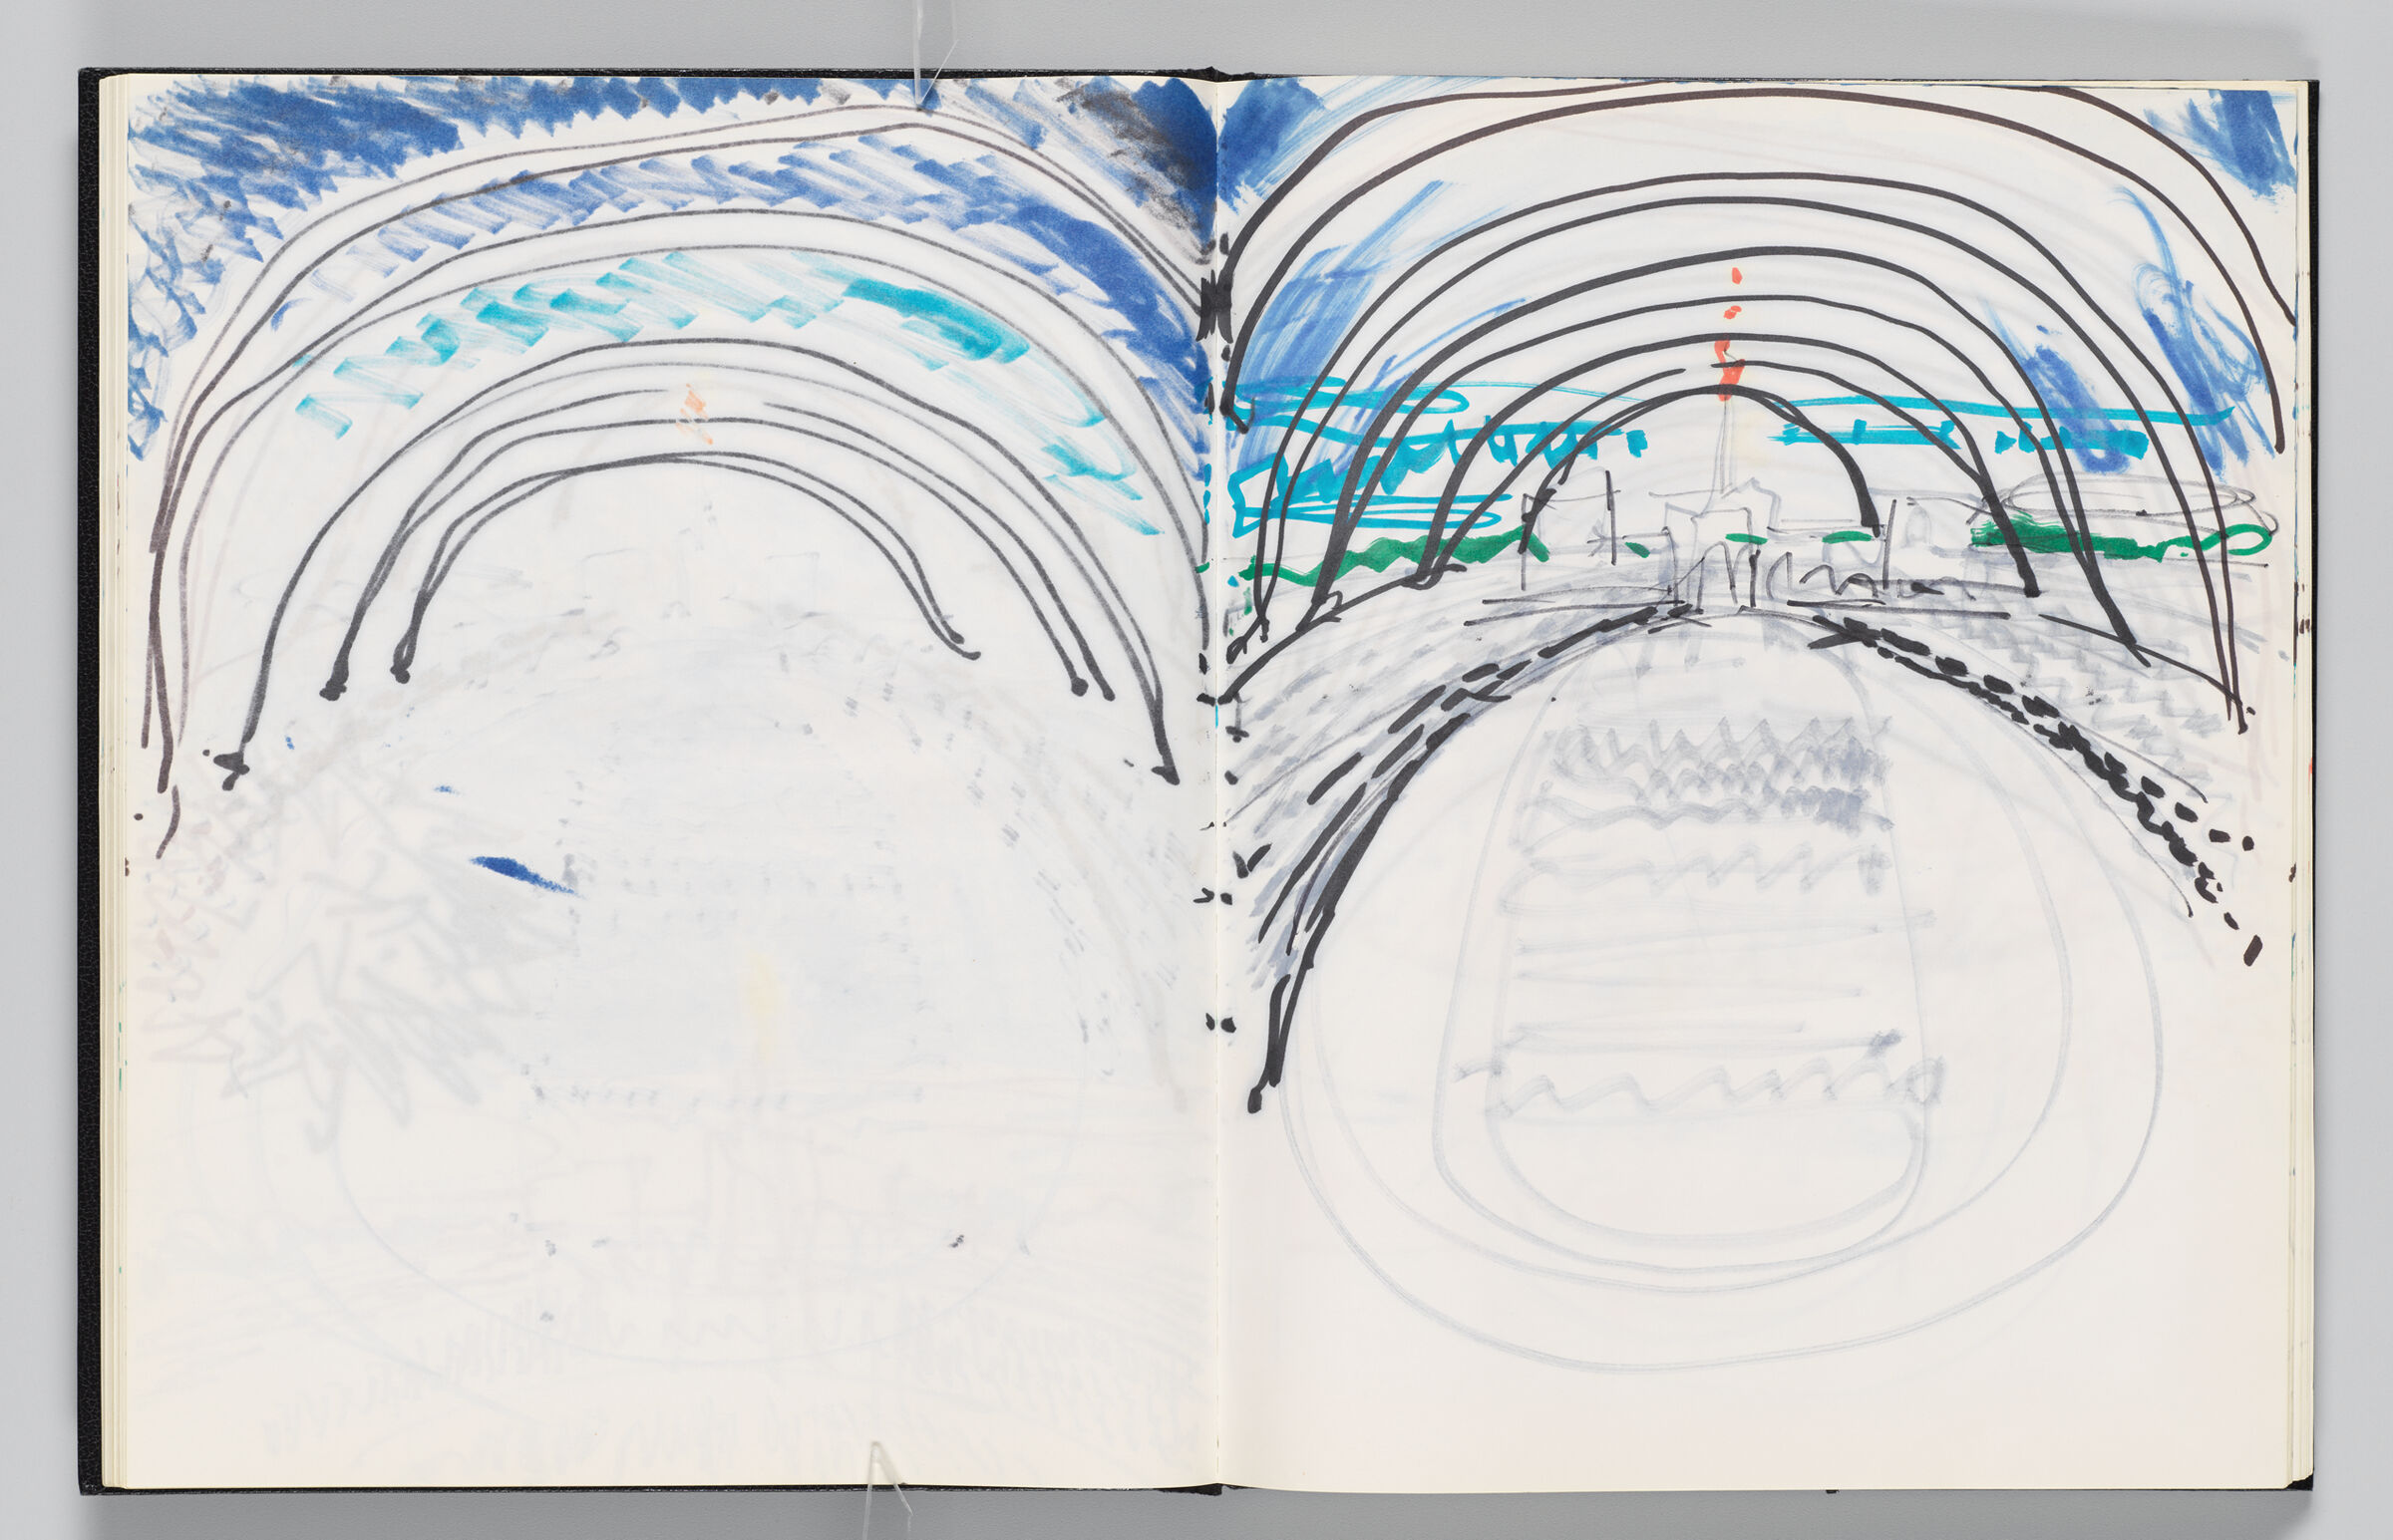 Untitled (Bleed-Through Of Previous Page, Left Page); Untitled (Rainbows Over Track, Right Page)